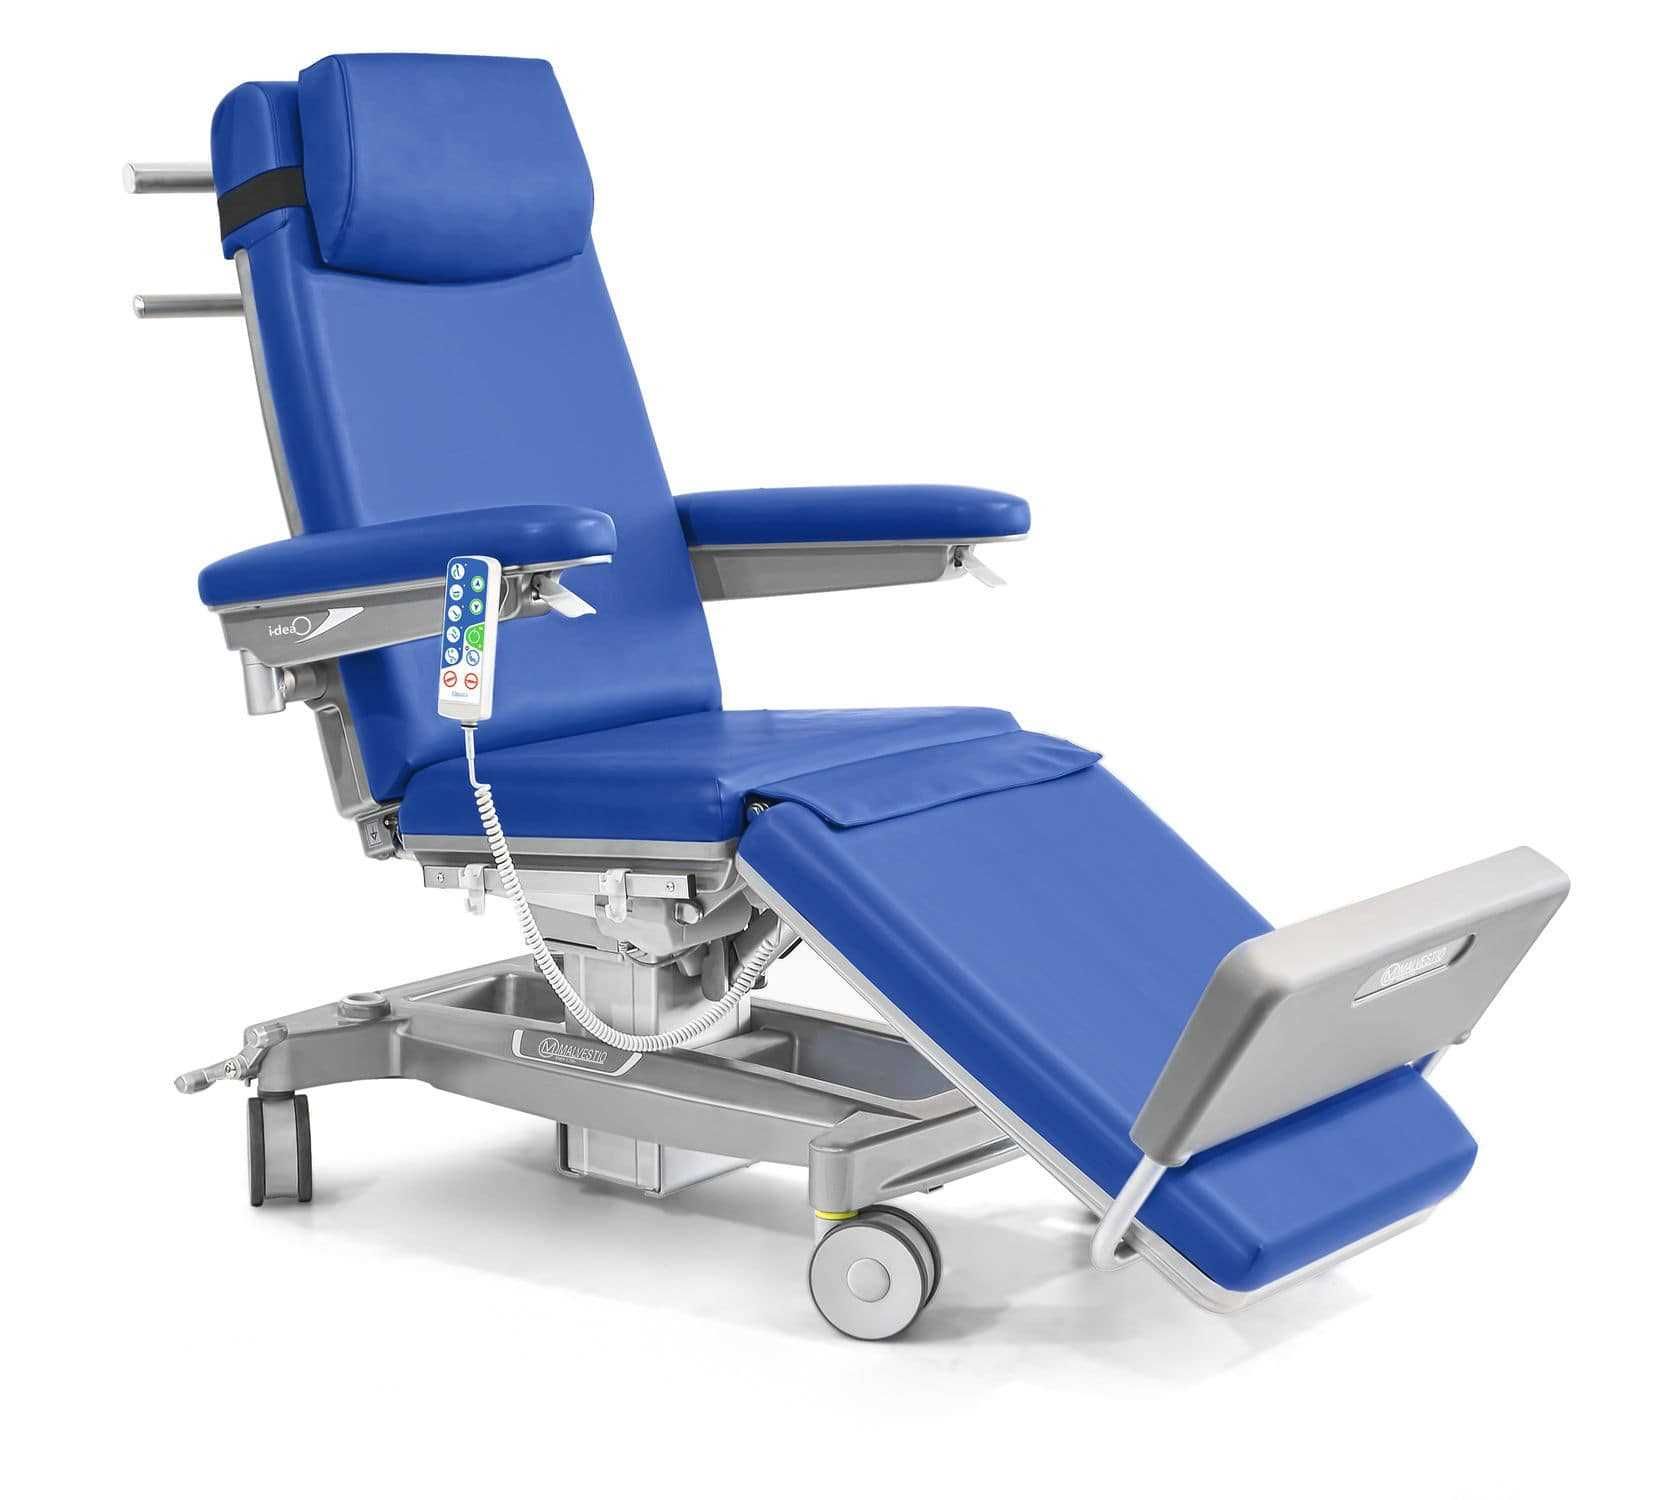 Electric treatment chair